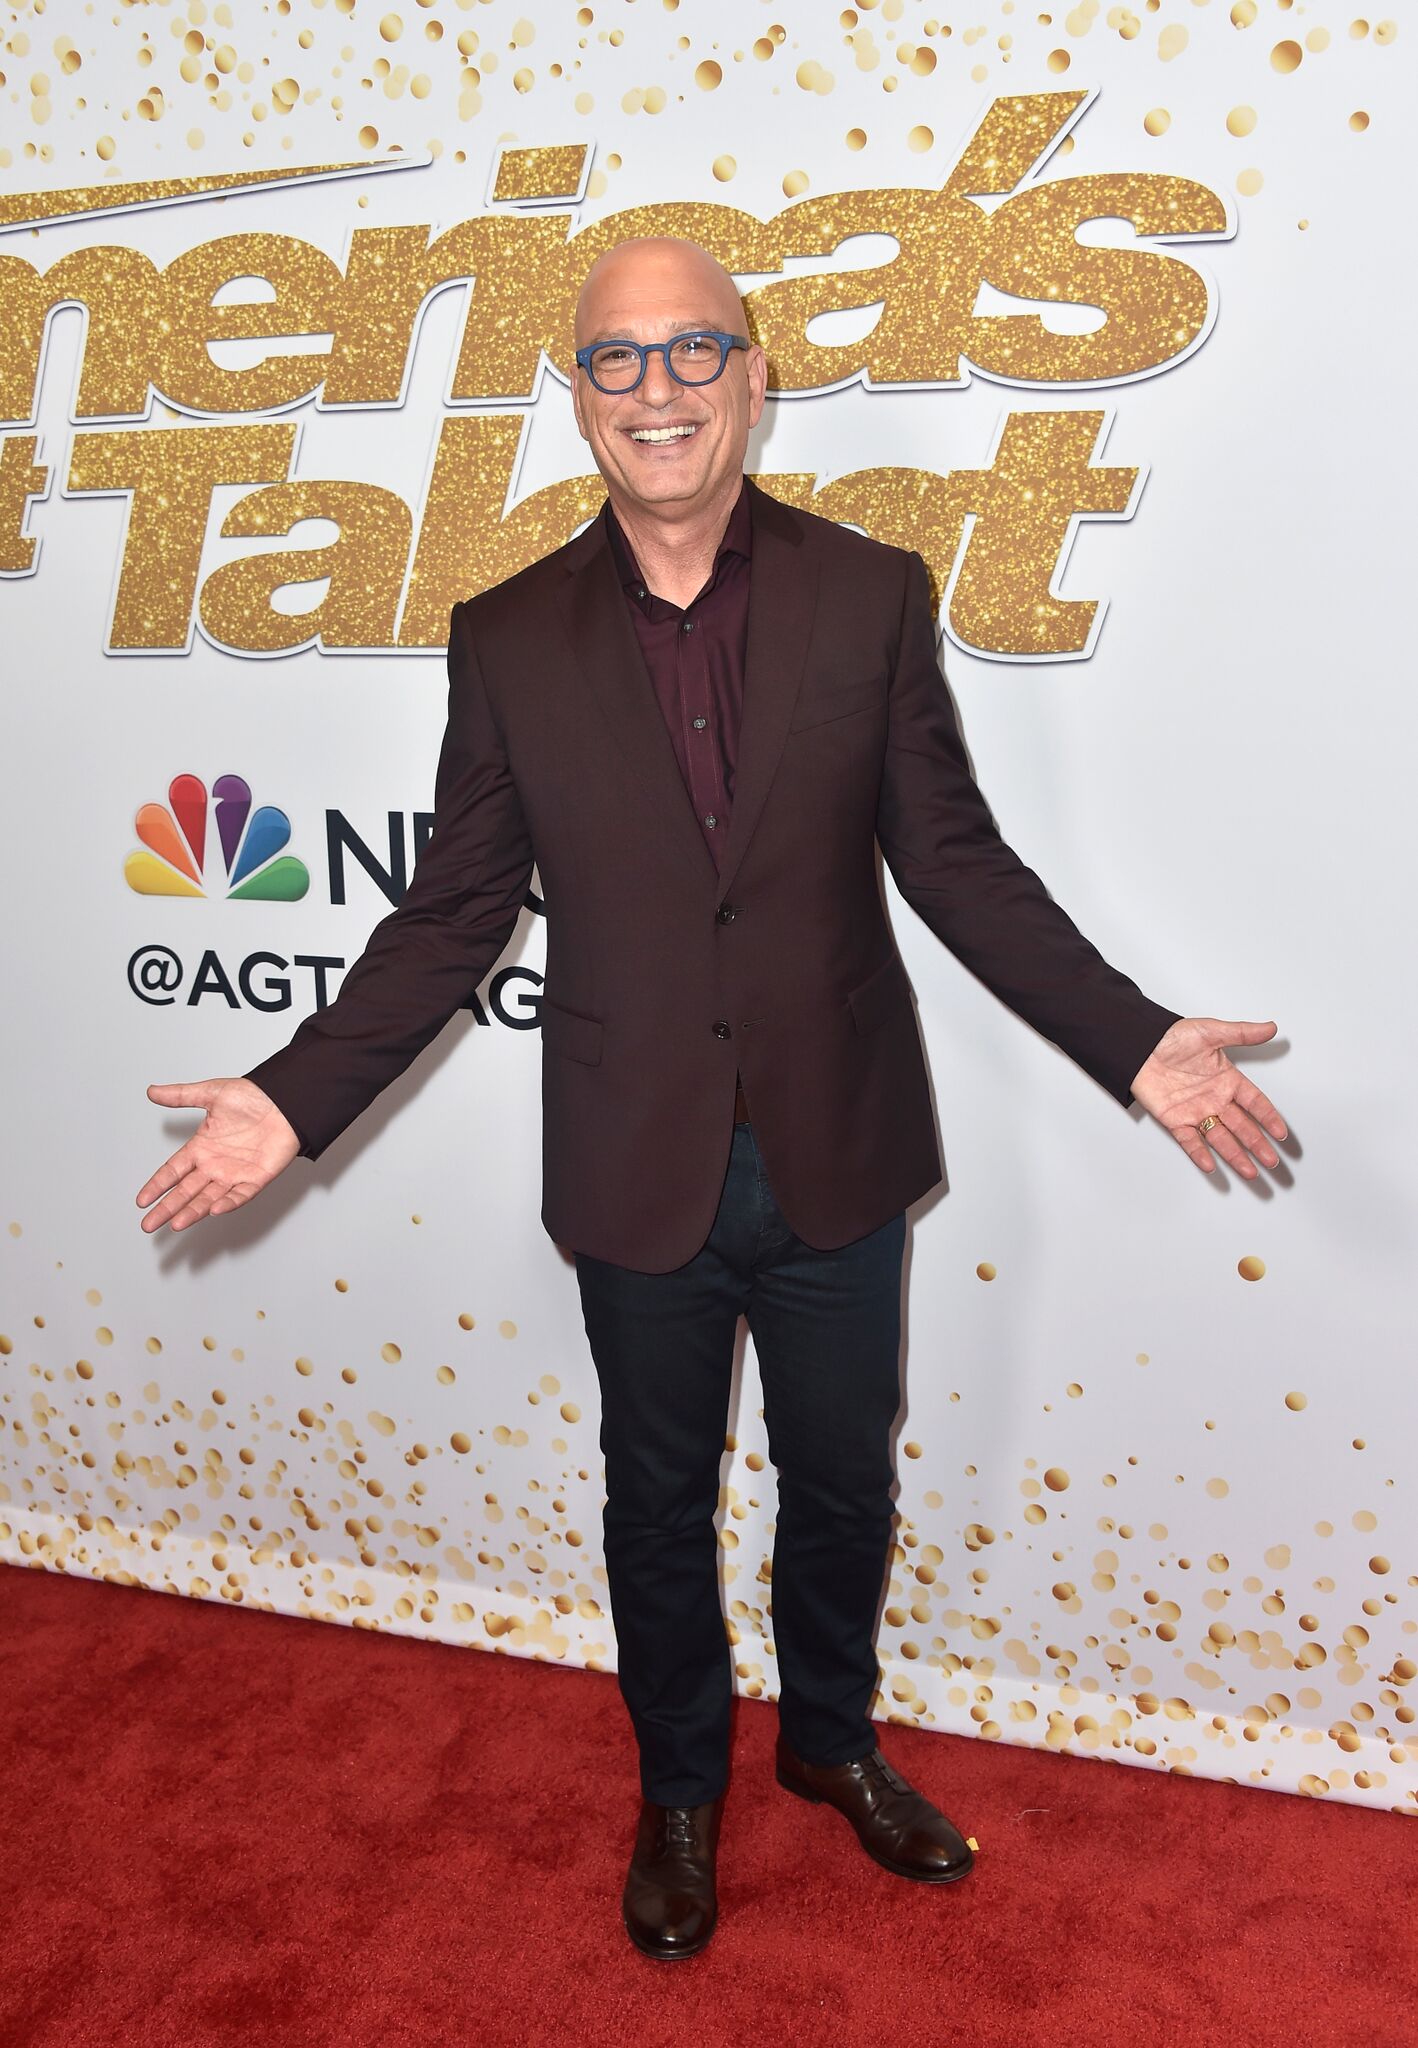 Judge Howie Mandel arrives for the "America's Got Talent" Season 13 Live Show at Dolby Theatre | Getty Images